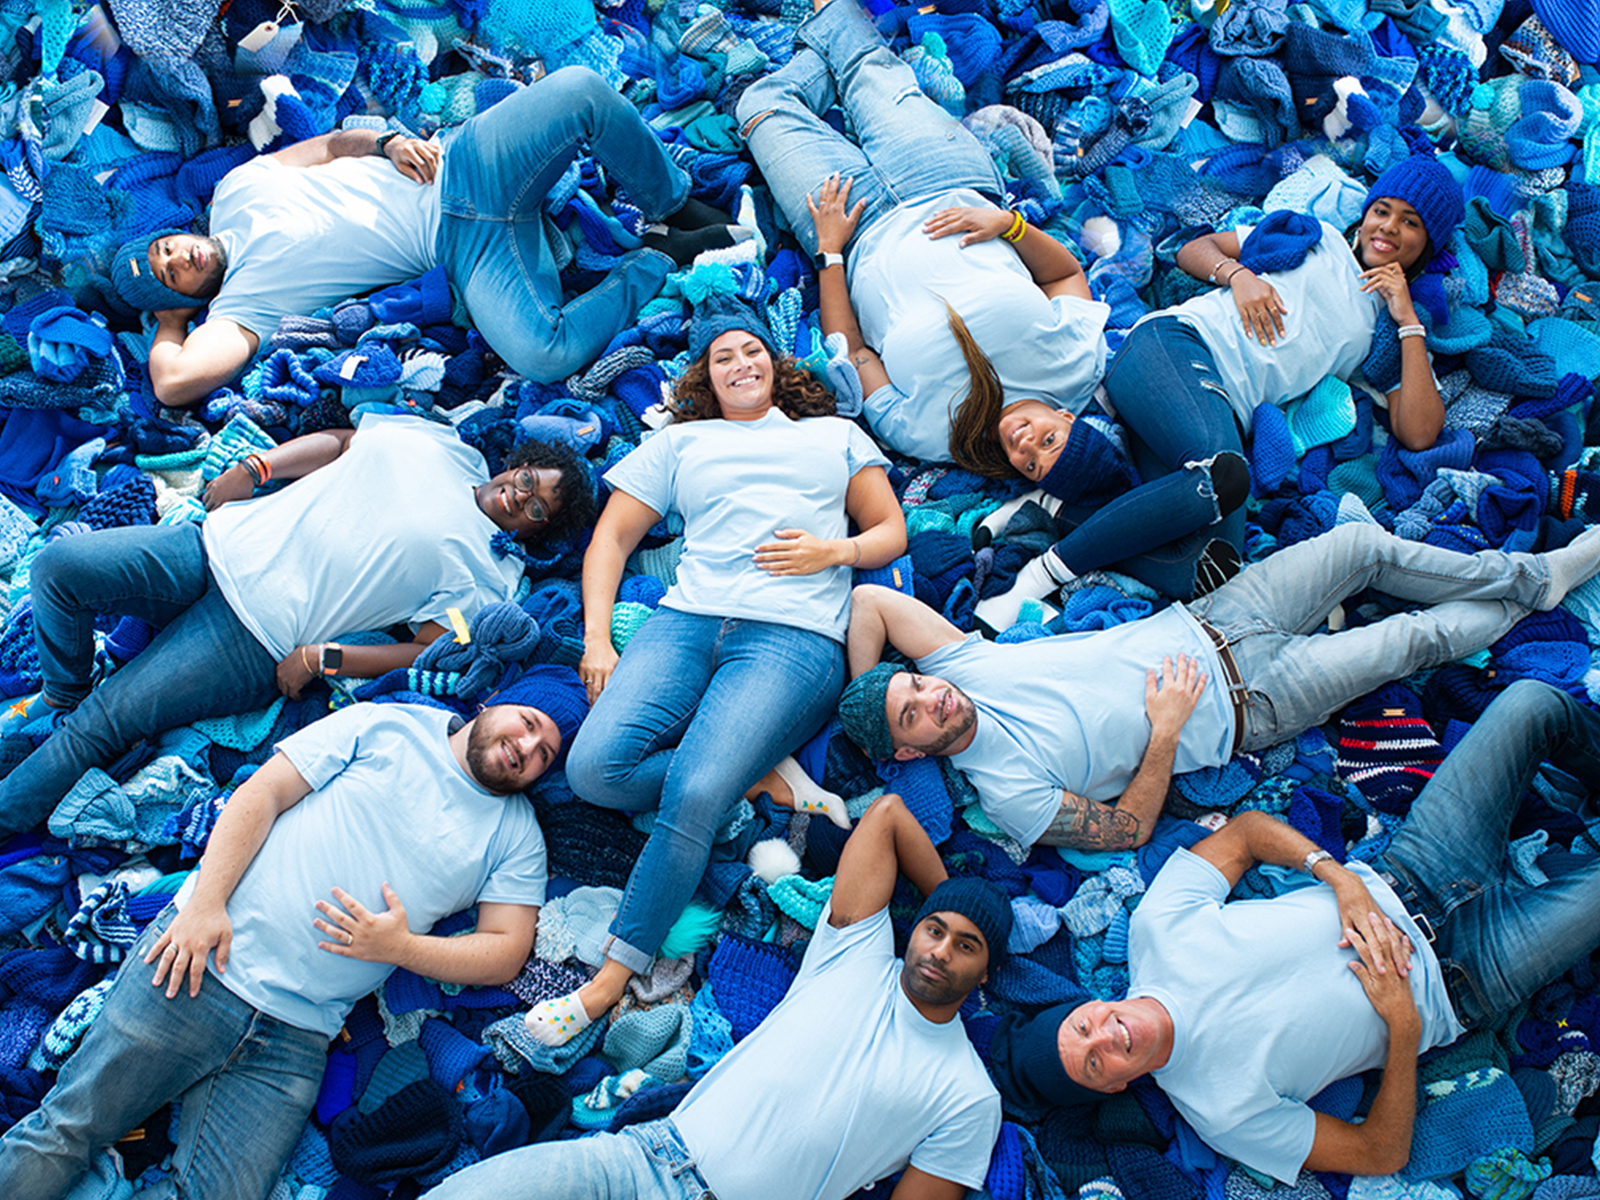 Shira and friends laying on pile of blue hats